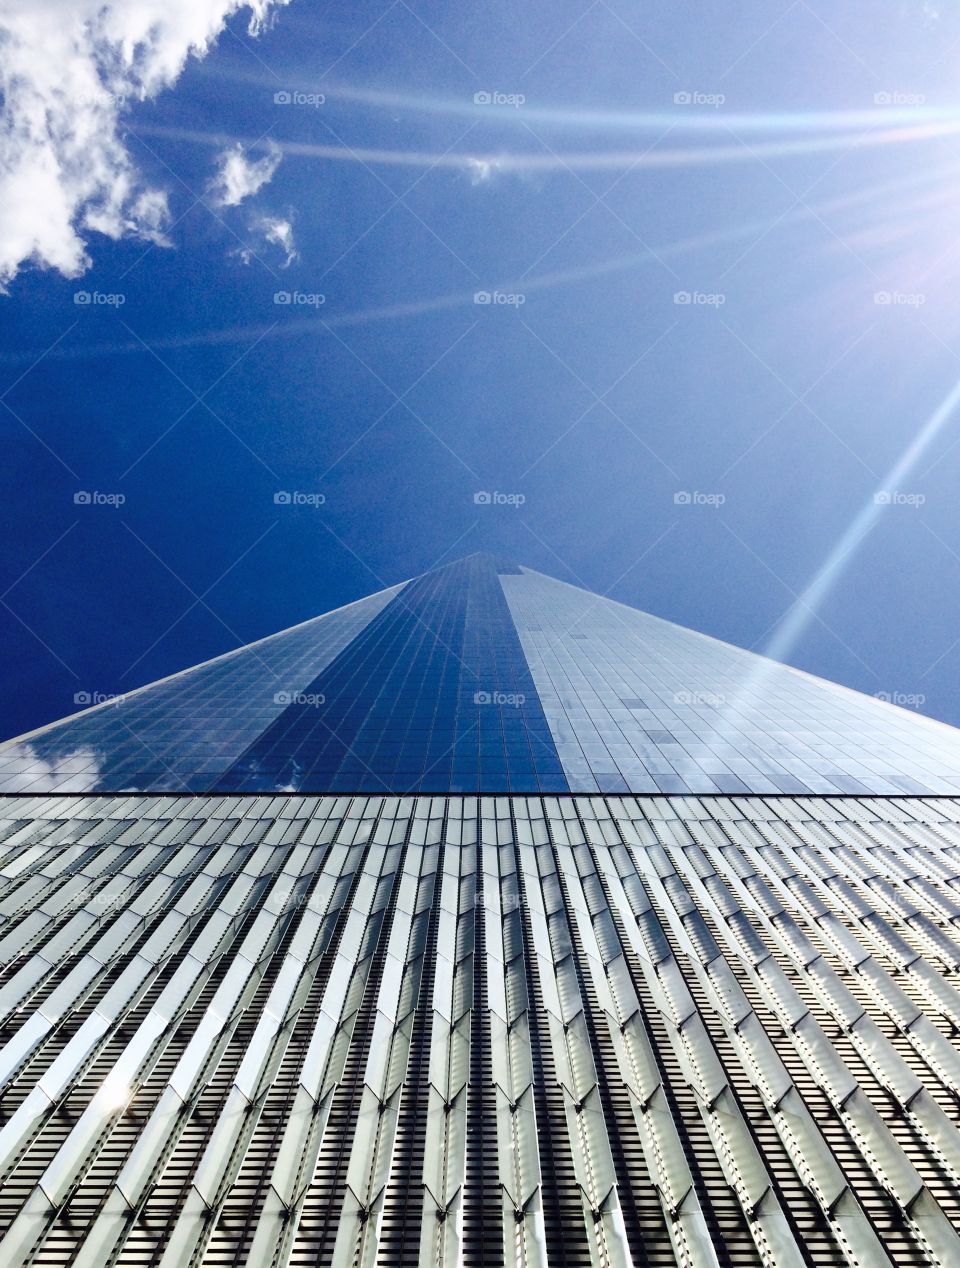 Up at One World Trade Center. A photo looking up from the bottom of the One World Trade Center.